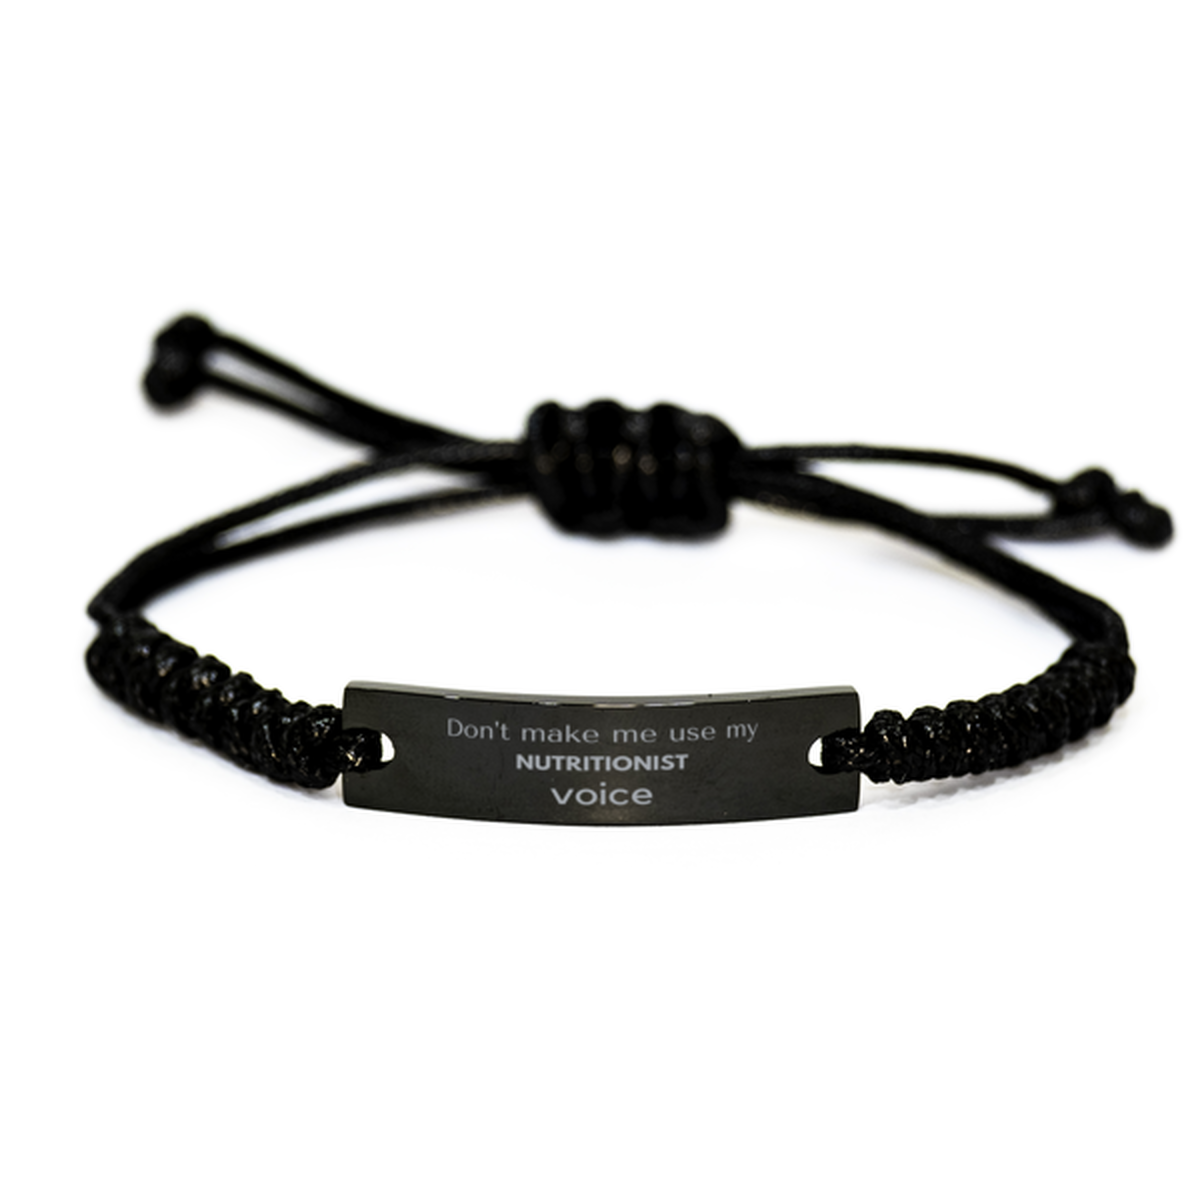 Don't make me use my Nutritionist voice, Sarcasm Nutritionist Gifts, Christmas Nutritionist Black Rope Bracelet Birthday Unique Gifts For Nutritionist Coworkers, Men, Women, Colleague, Friends